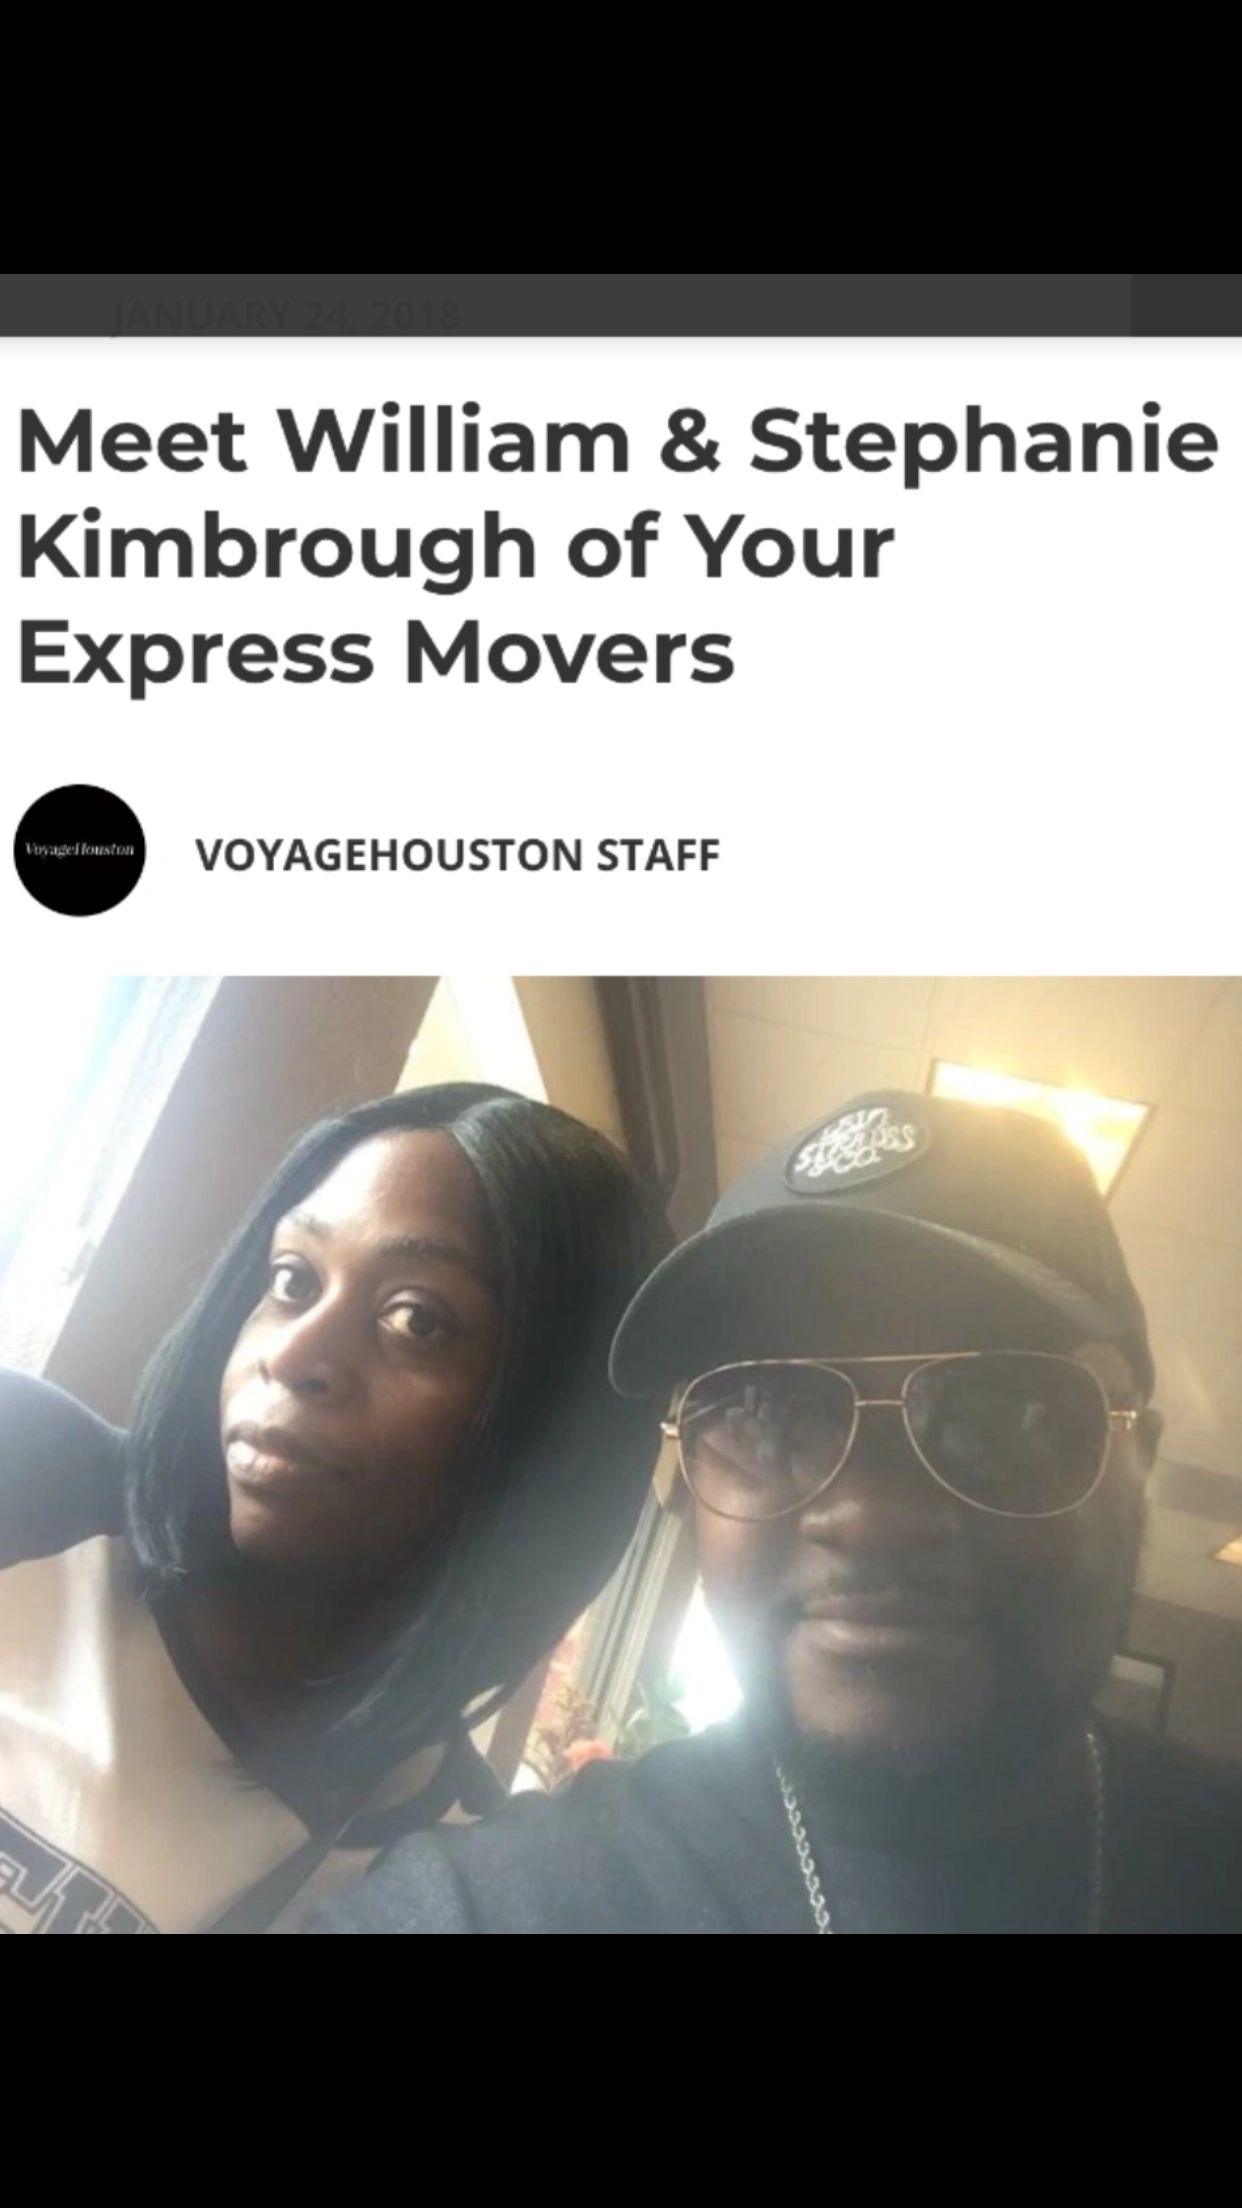 http://voyagehouston.com/interview/meet-william-stephanie-kimbrough-express-movers-southeast/